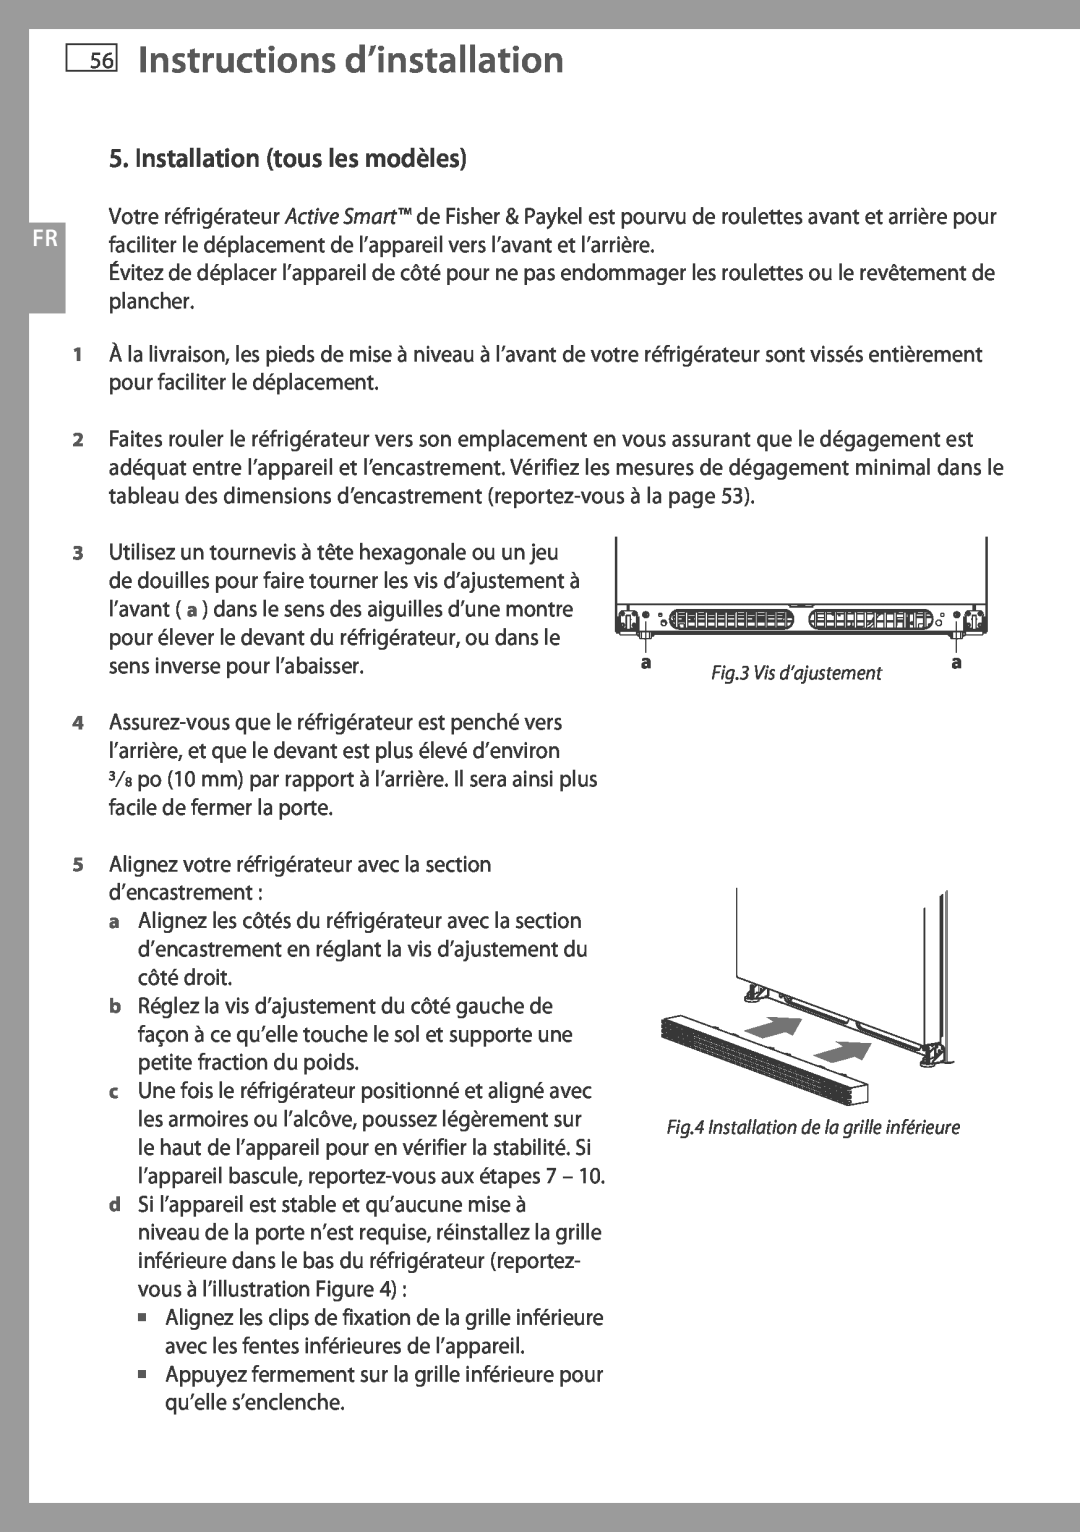 Fisher & Paykel RF175W, RF195A installation instructions 56Instructions d’installation, Installation tous les modèles 